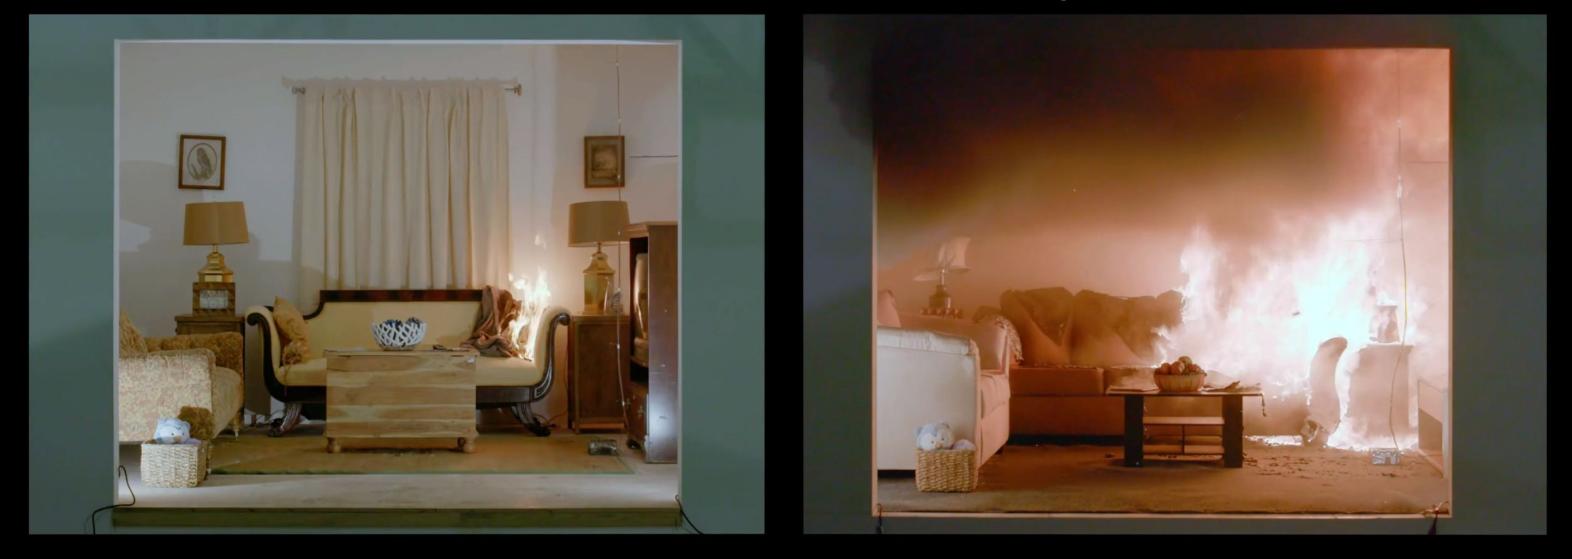 Two living rooms side by side with the one on the left containing furniture of natural material and the one on the right containing furniture made of synthetic materials. The living room on the right is also on fire. 